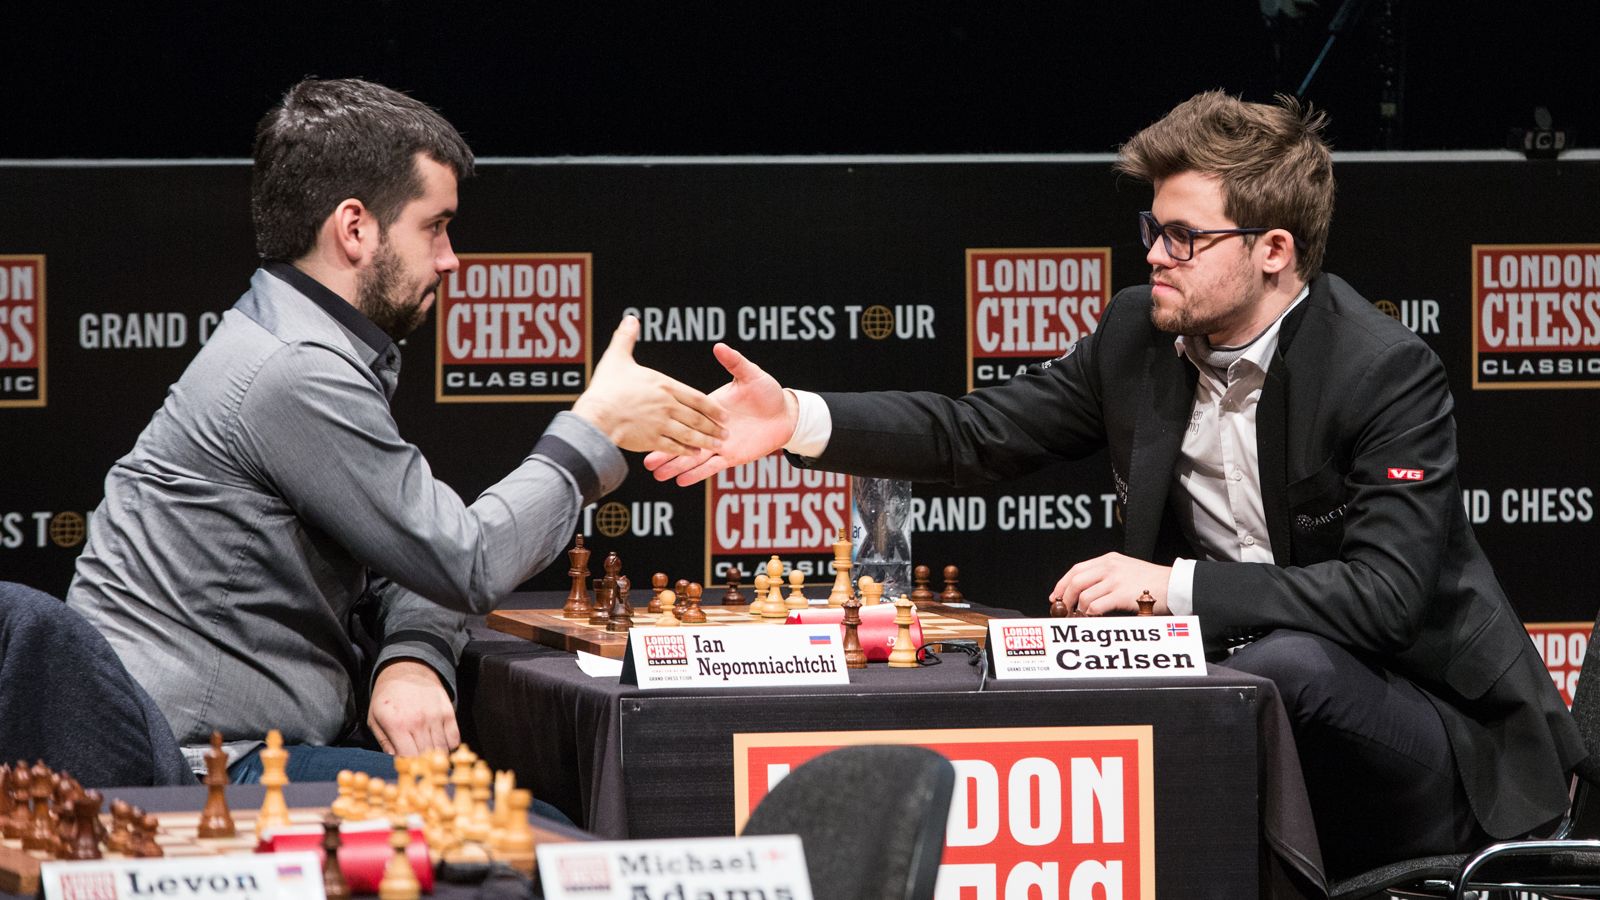 Ian Nepomniachtchi and Magnus Carlsen…Friends or foes!